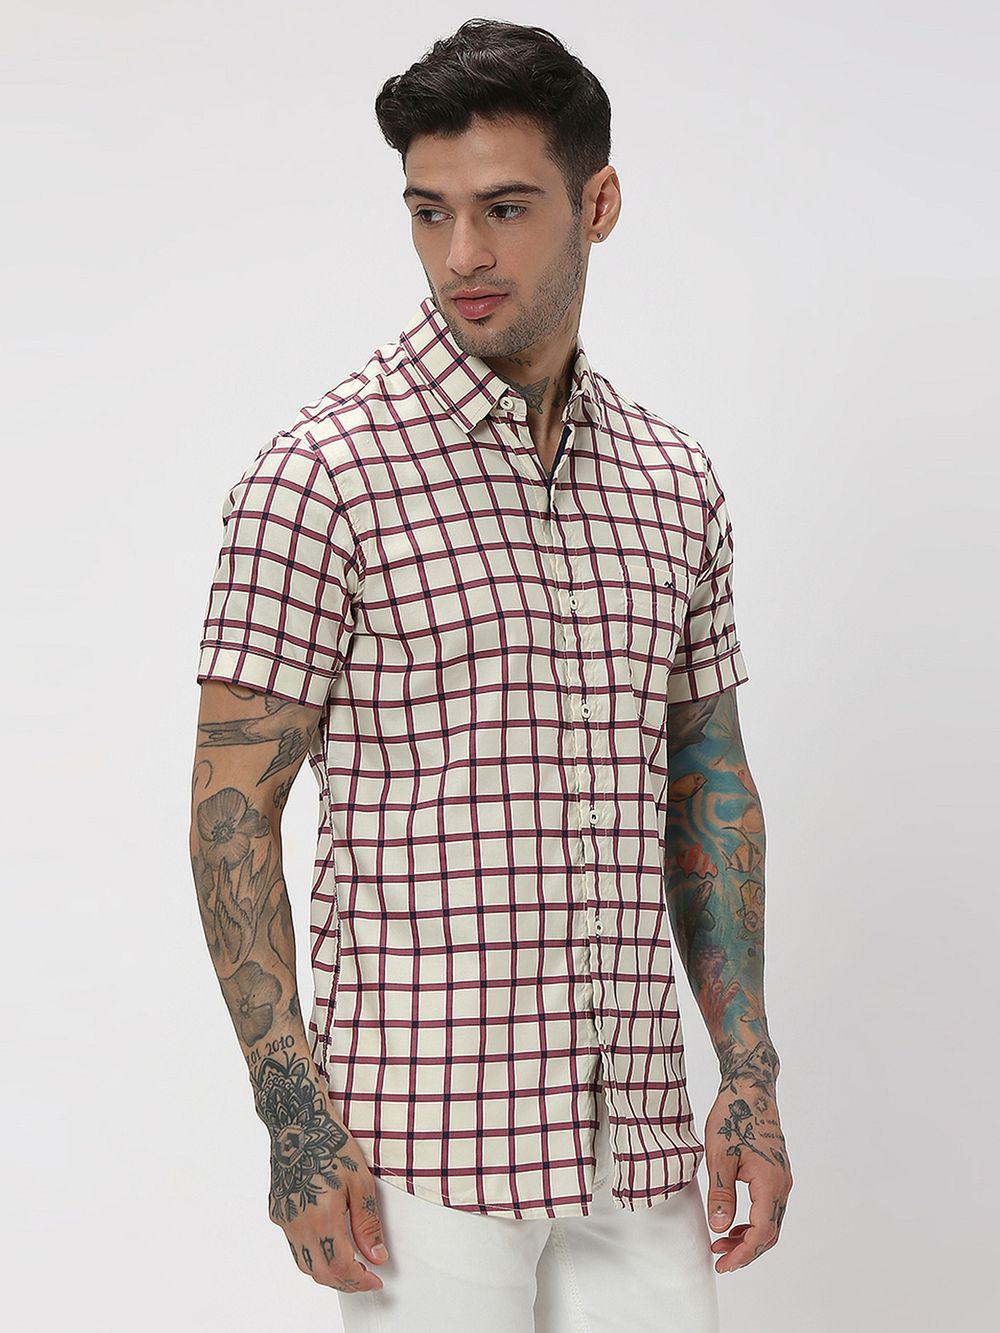 Off White & Pink Grid Check Slim Fit Casual Shirt